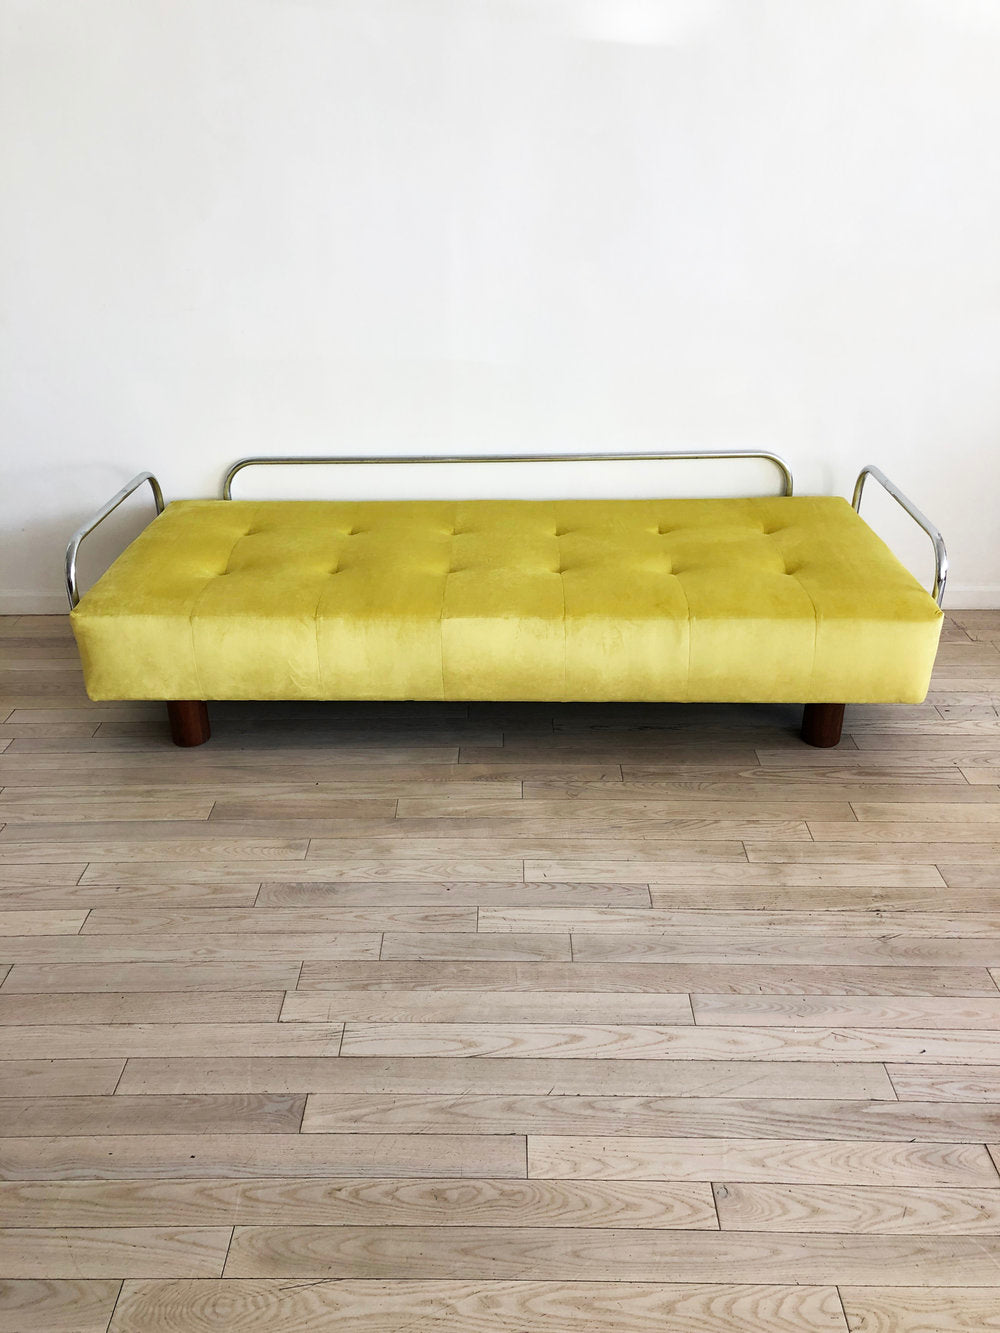 1960s Adrian Pearsall For Craft Yellow Sofa